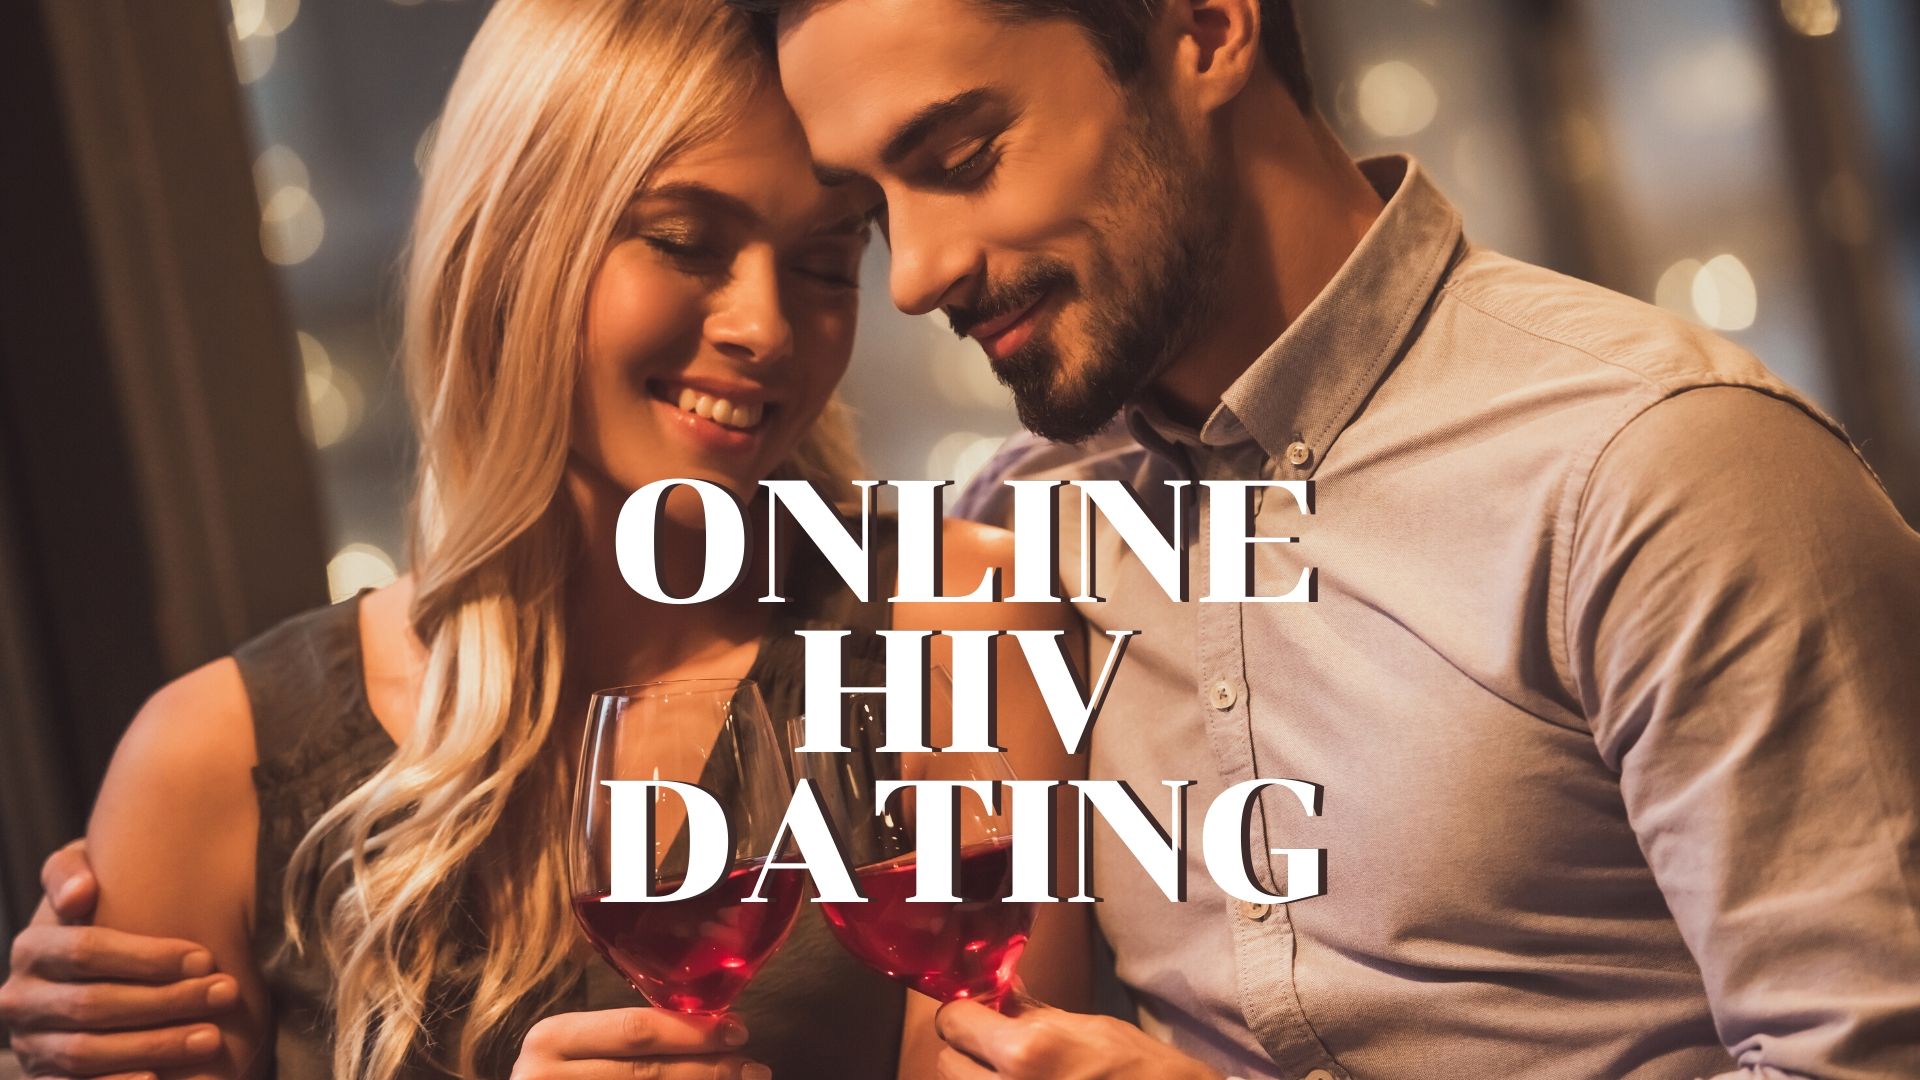 Hiv positive online dating